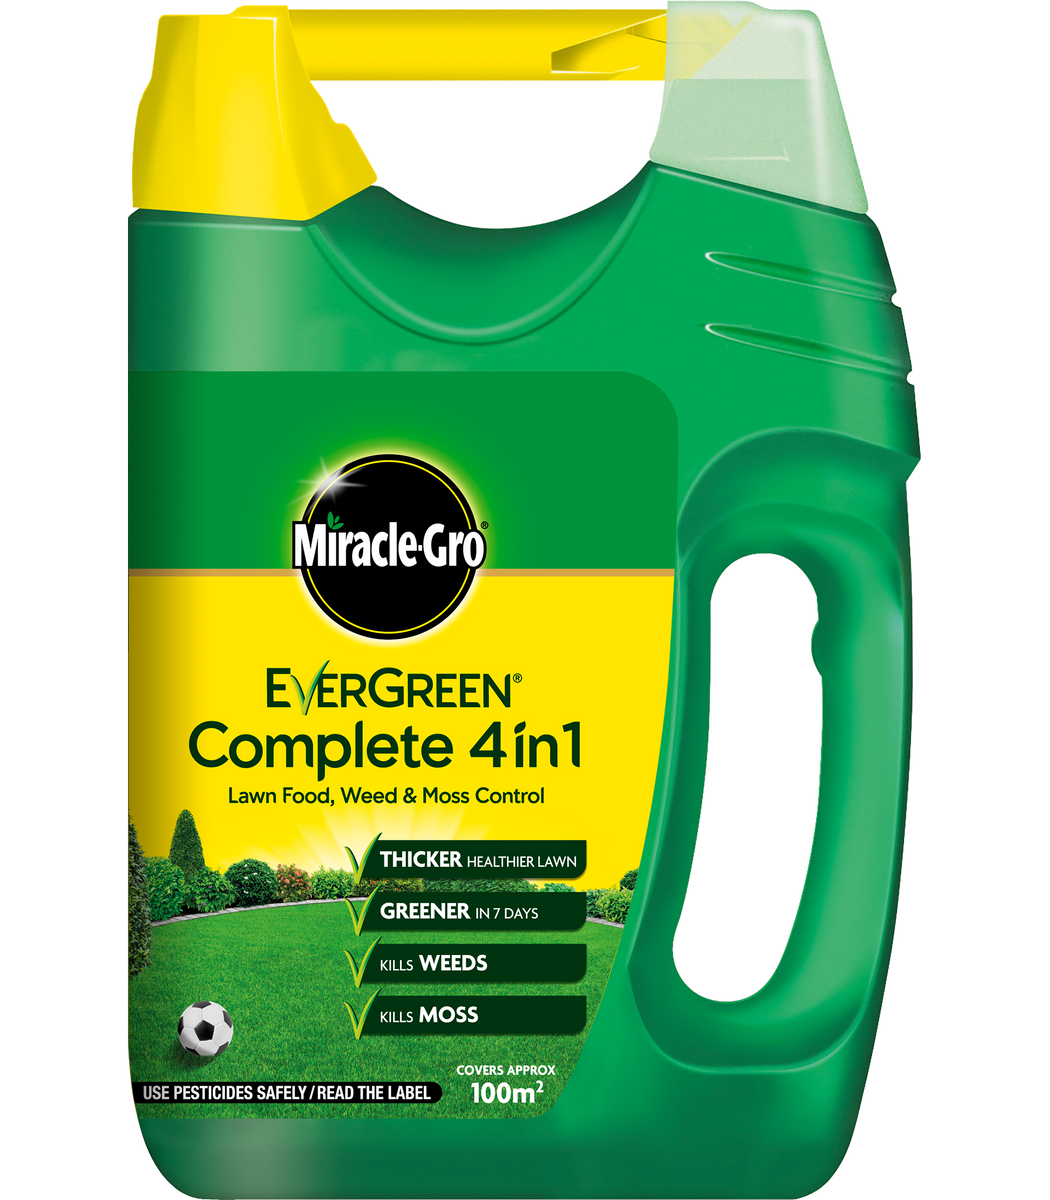 MiracleGro Evergreen Complete 4 in 1 Lawn Feed and Weed Large 3.5kg